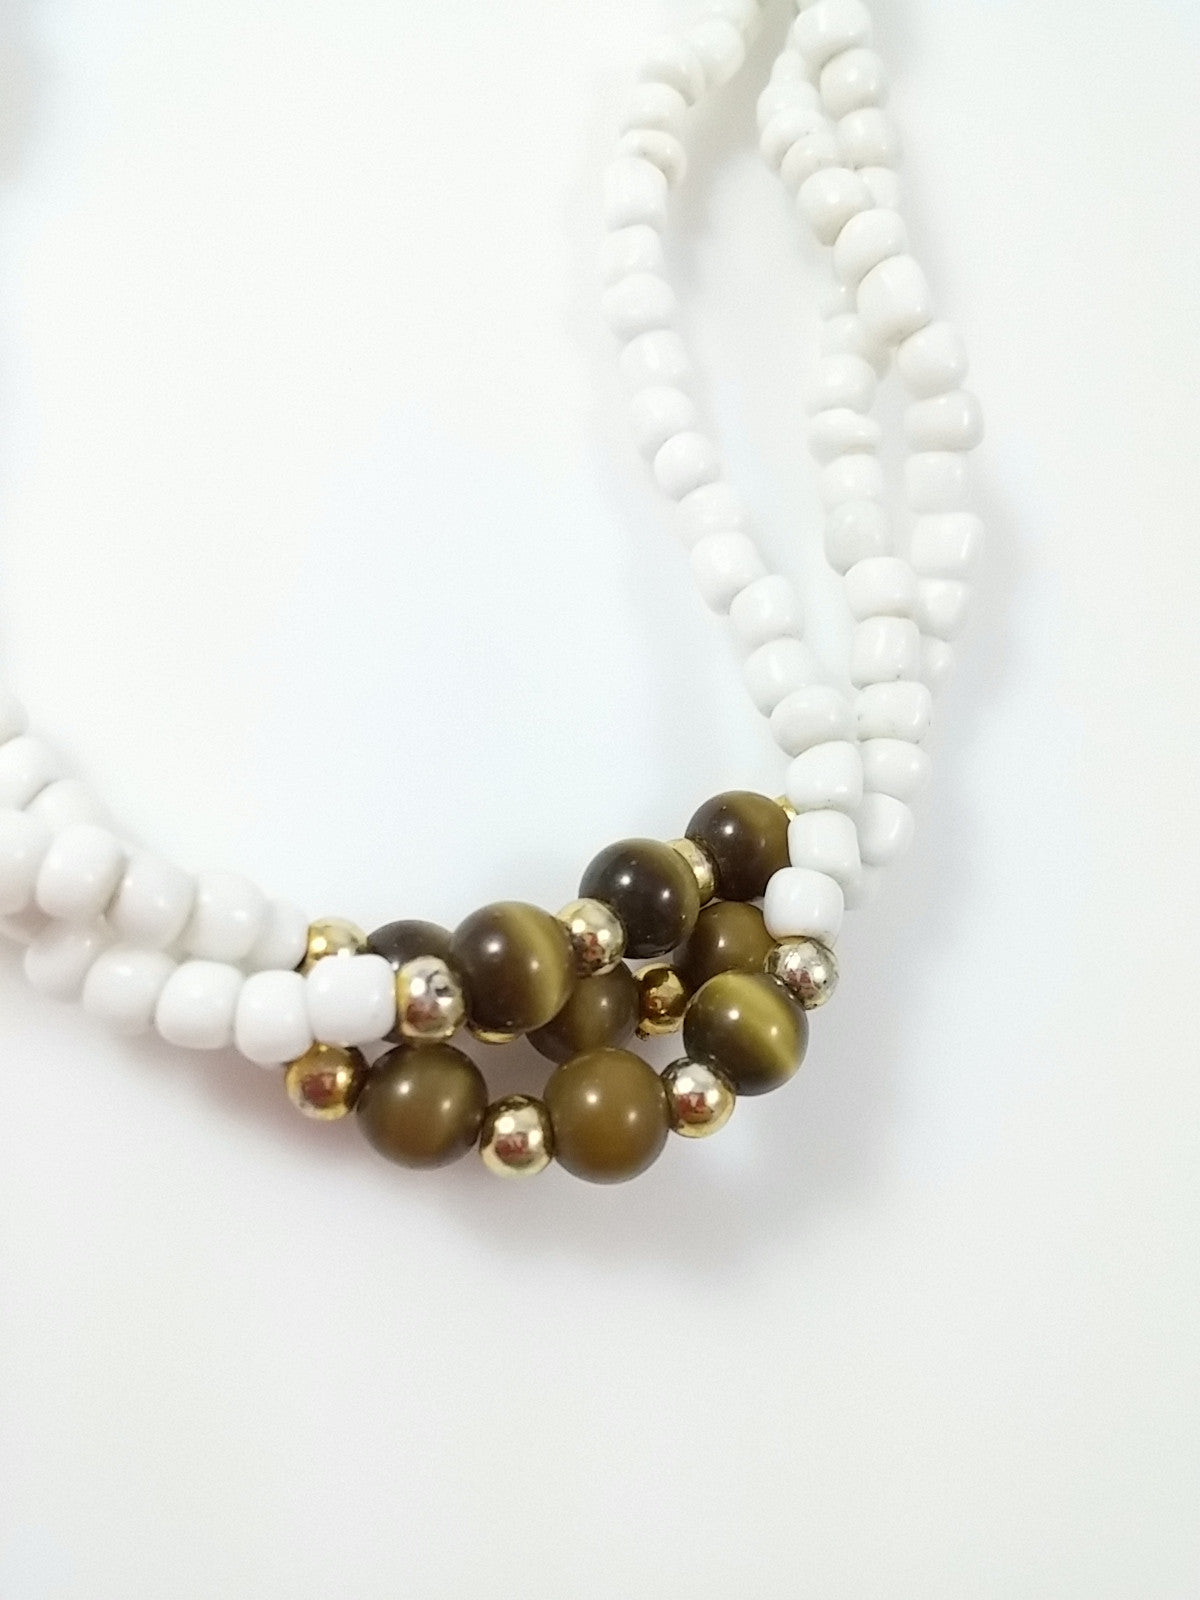 Vintage 60s Triple Strand Necklace Twisted White Beads w/ Tiger Eye Accent - Dirty 30 Vintage | Vintage Clothing, Vintage Jewelry, Vintage Accessories